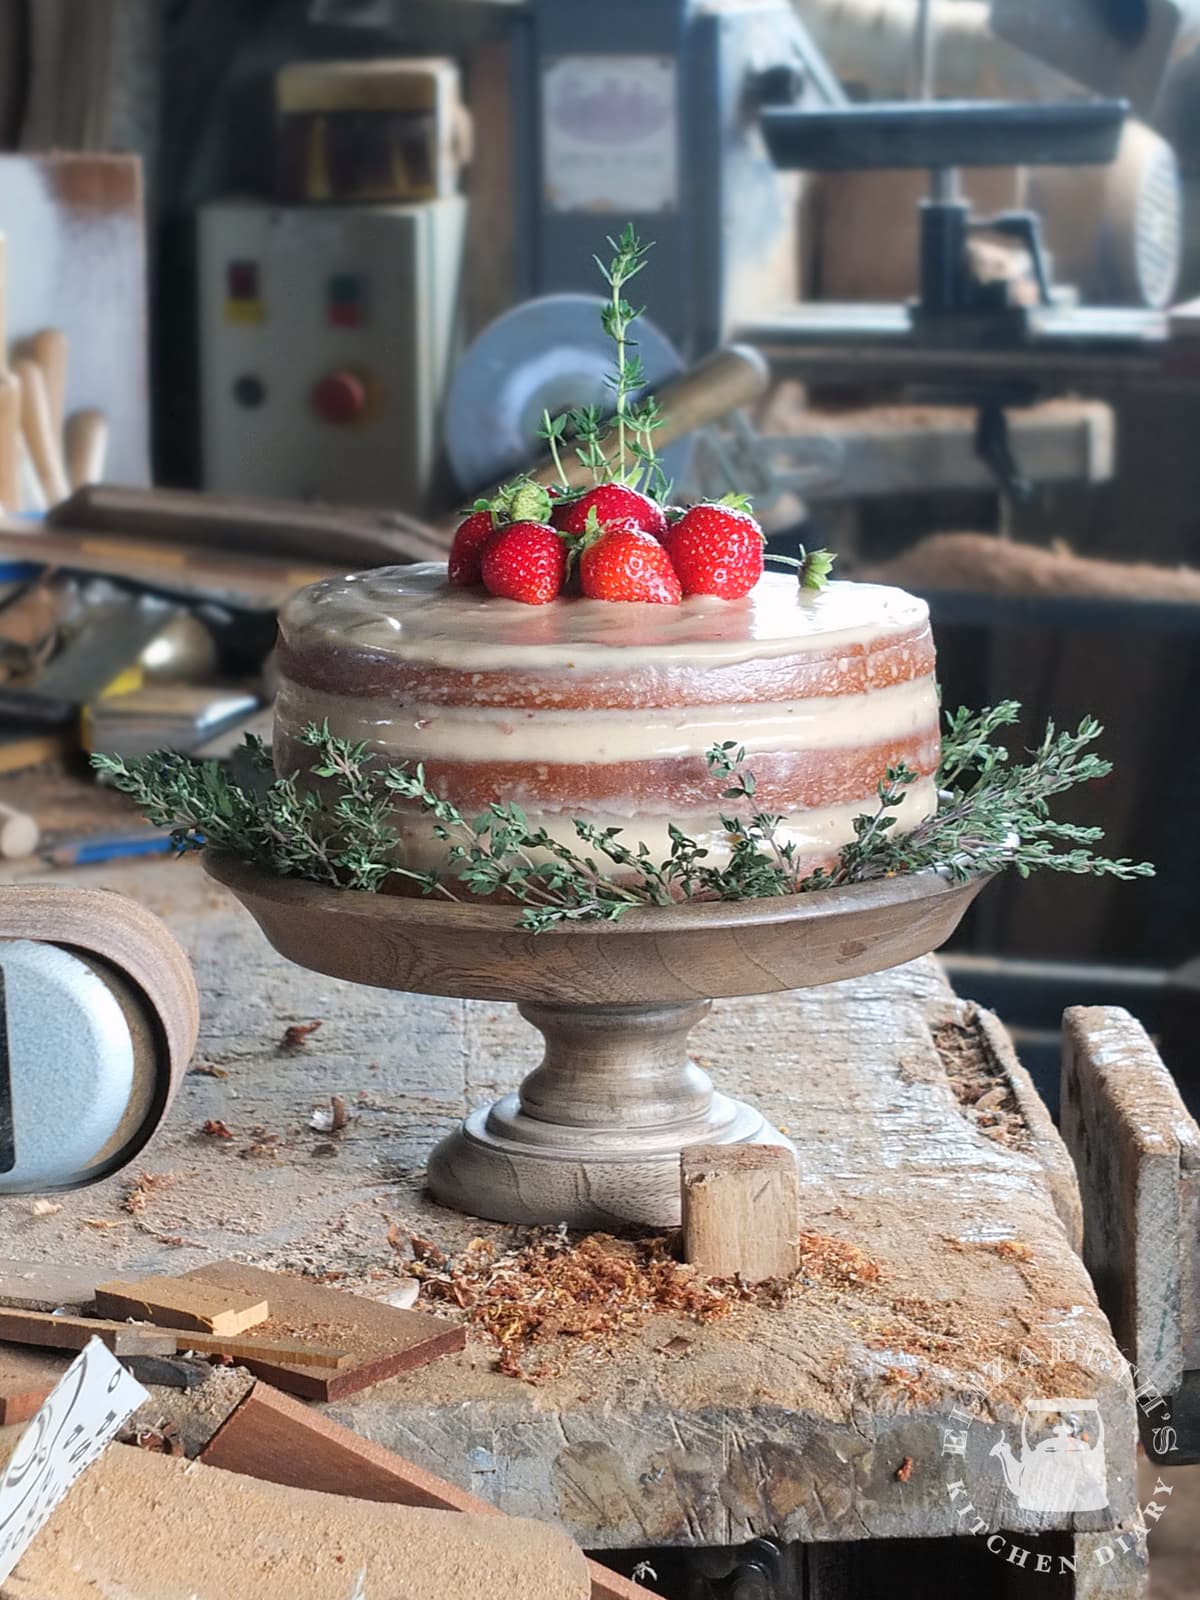 Image of a naked iced three layer birthday cake with strawberries and thyme sprigs to decorate.